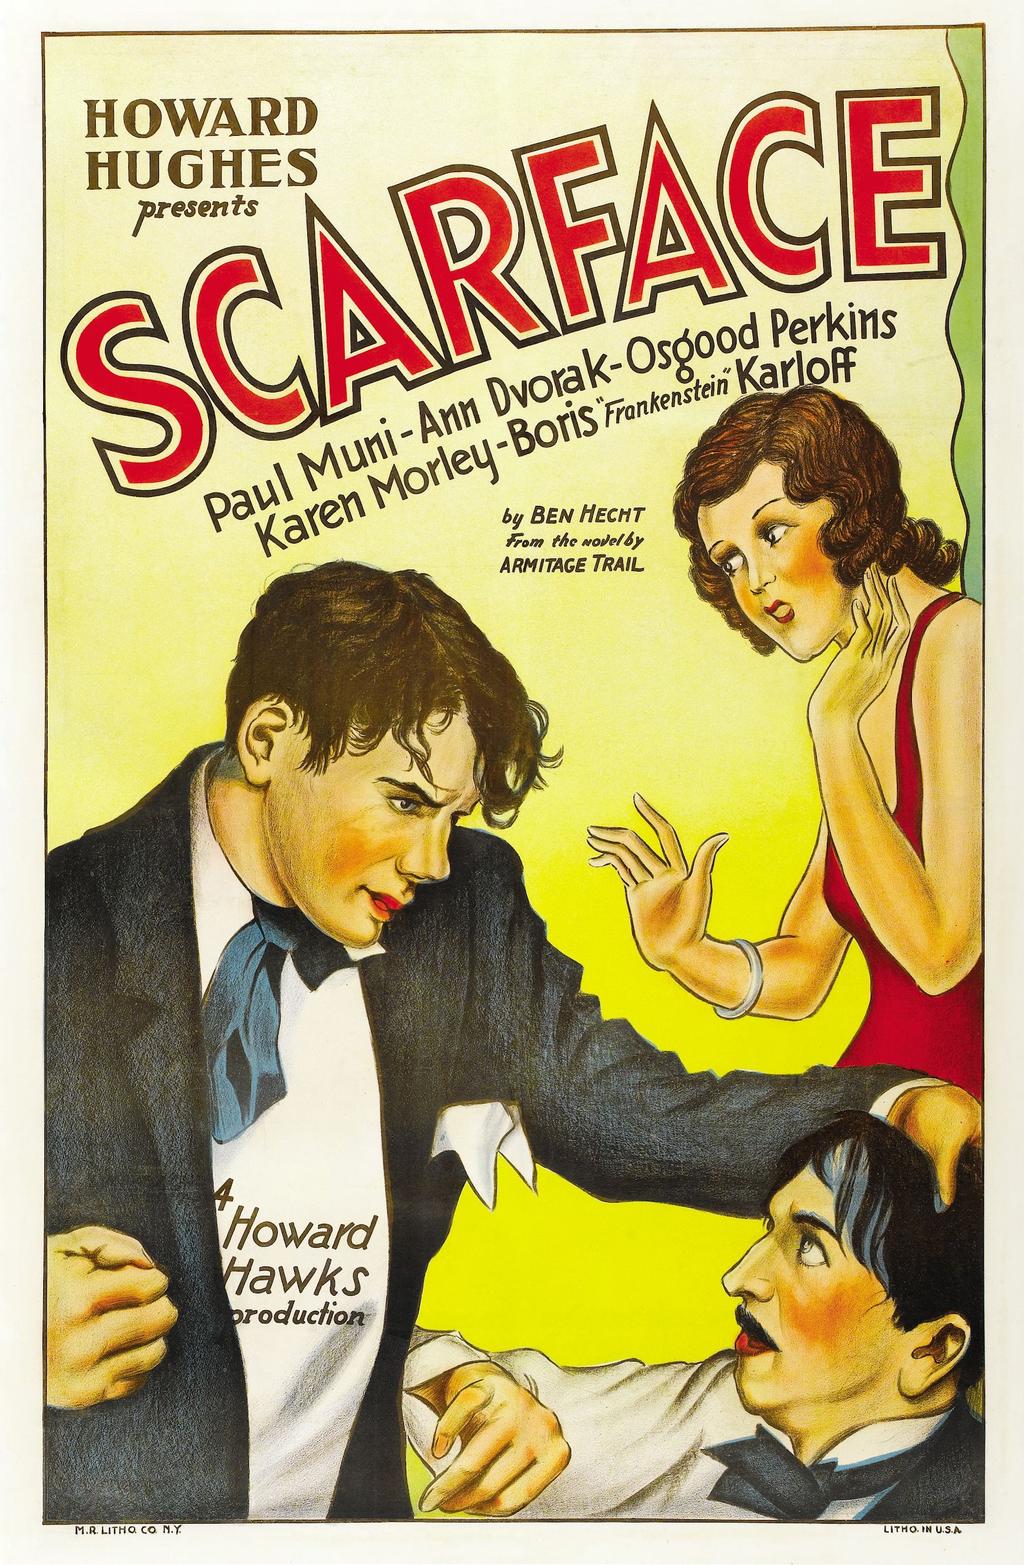 Scarface: The Shame of the Nation (1932) The film was based on the 1930 novel Scarface.